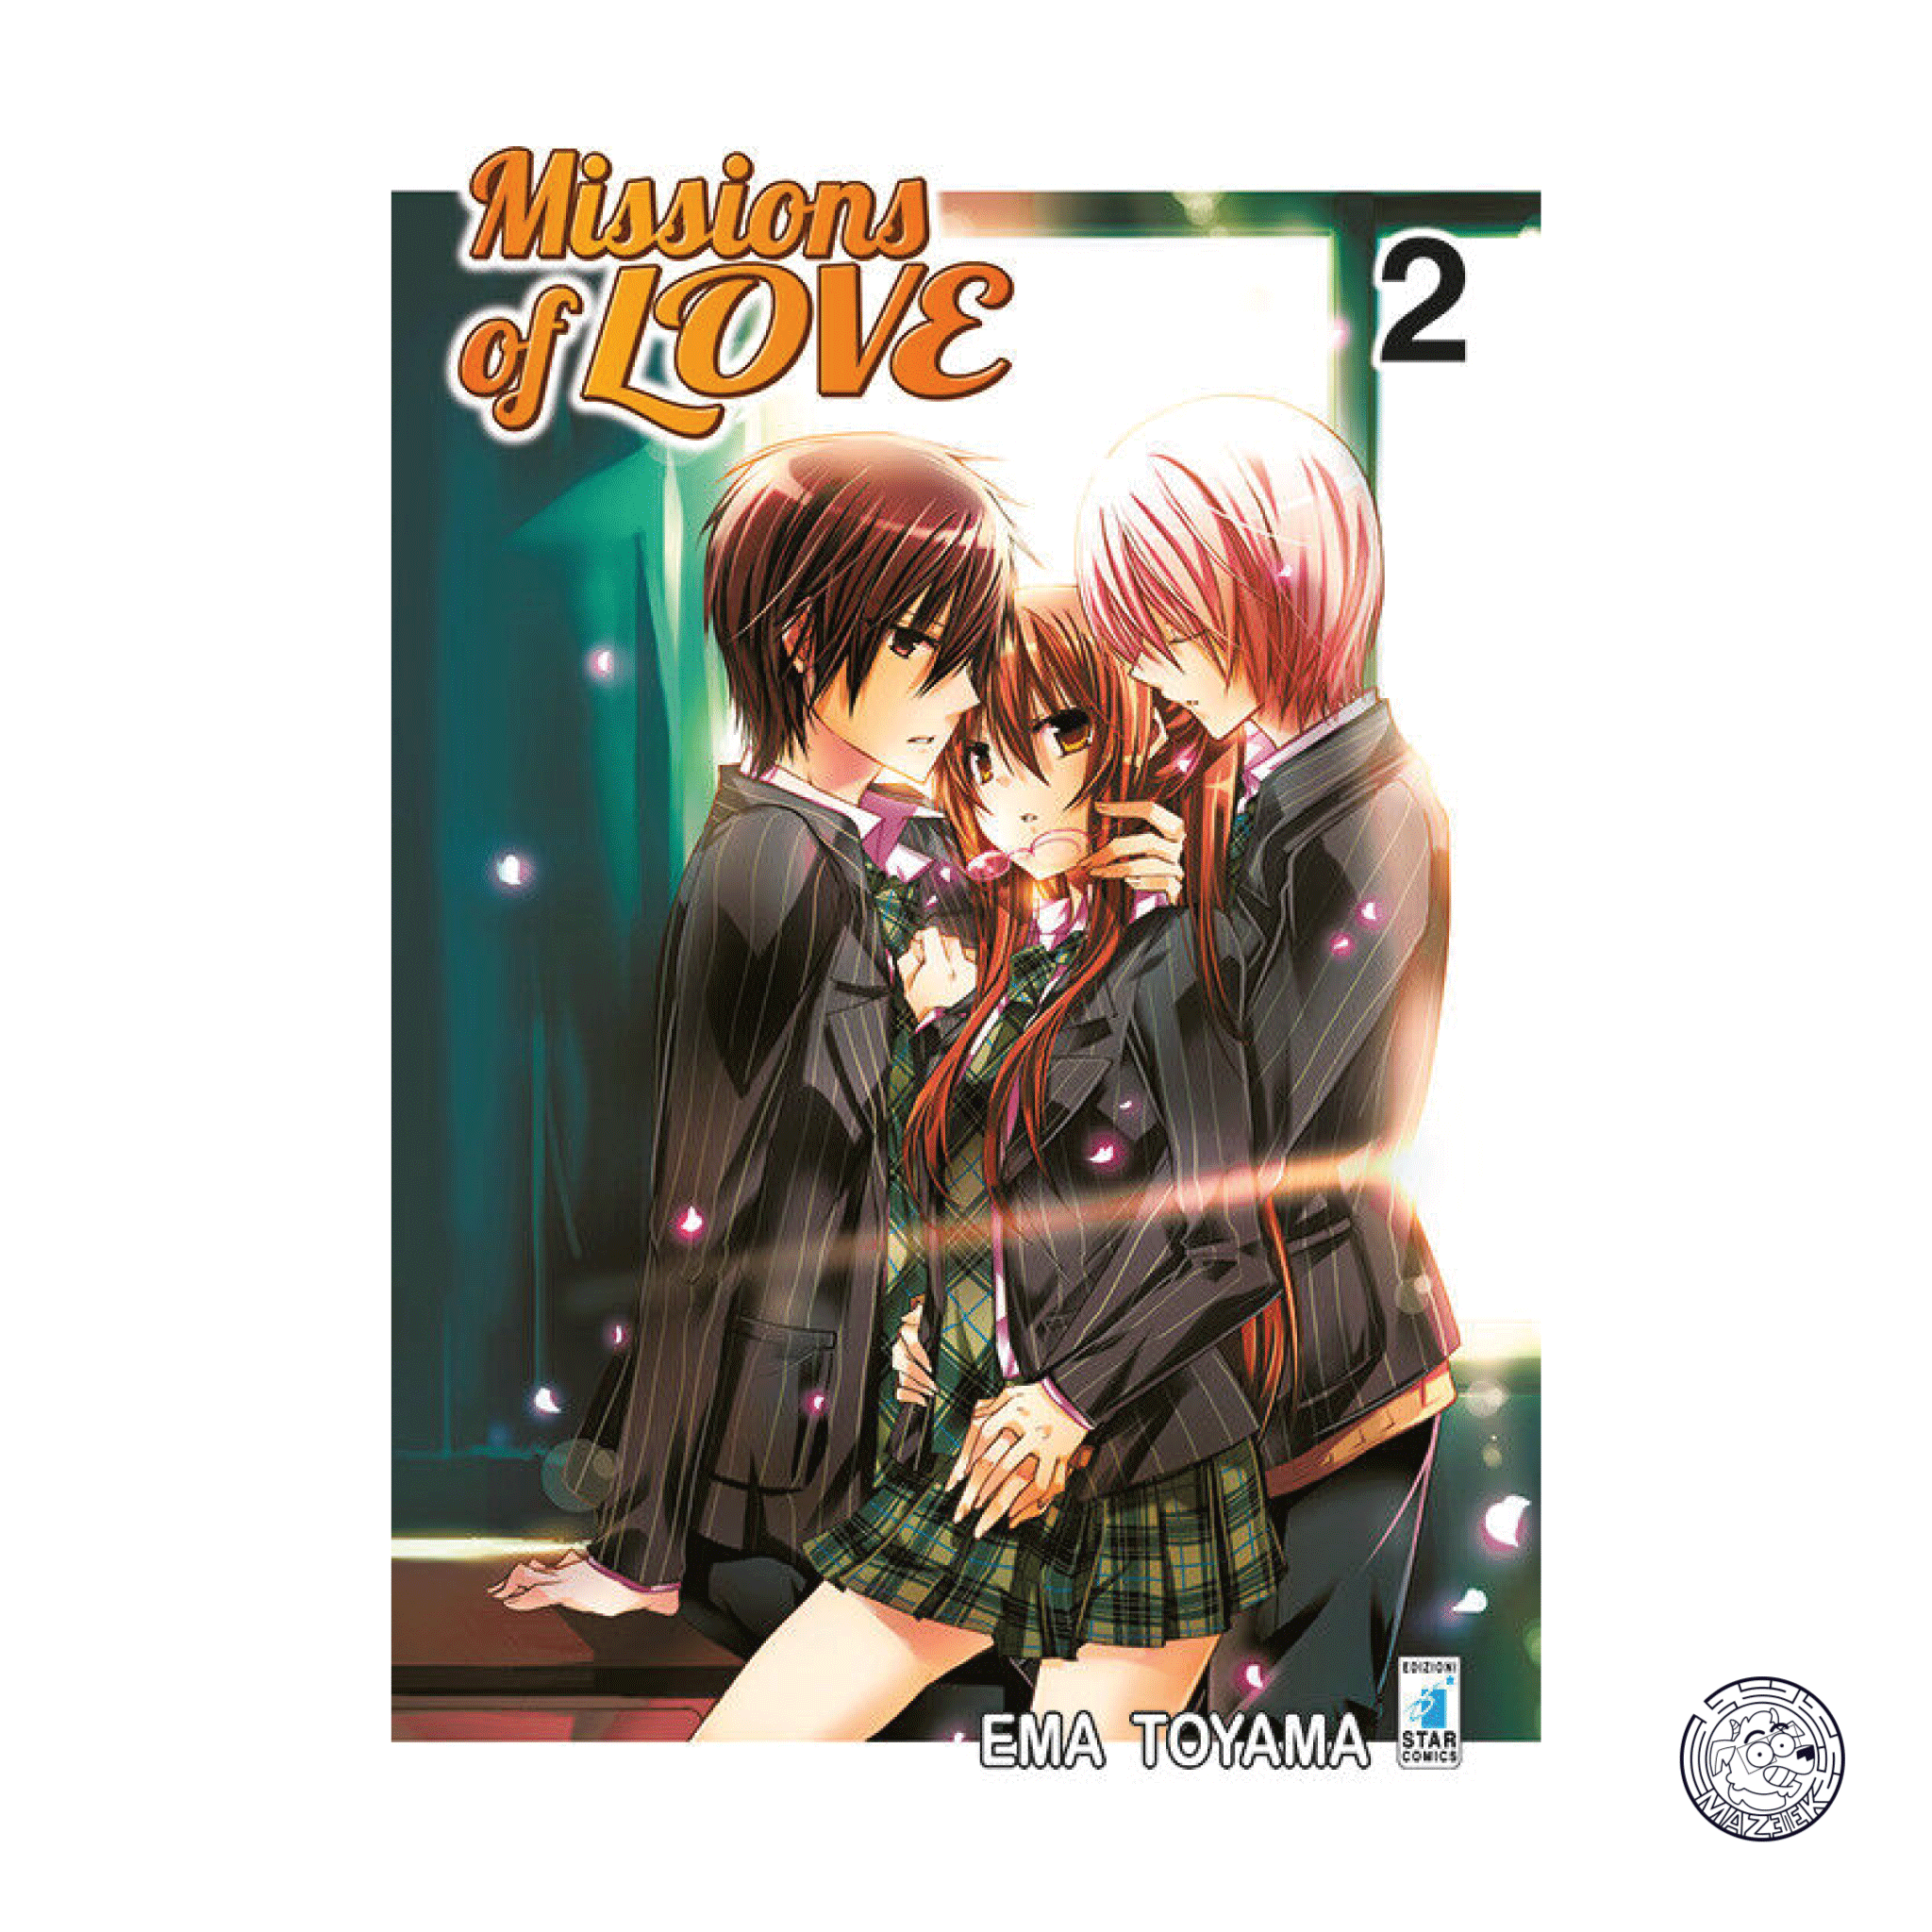 Missions Of Love 02